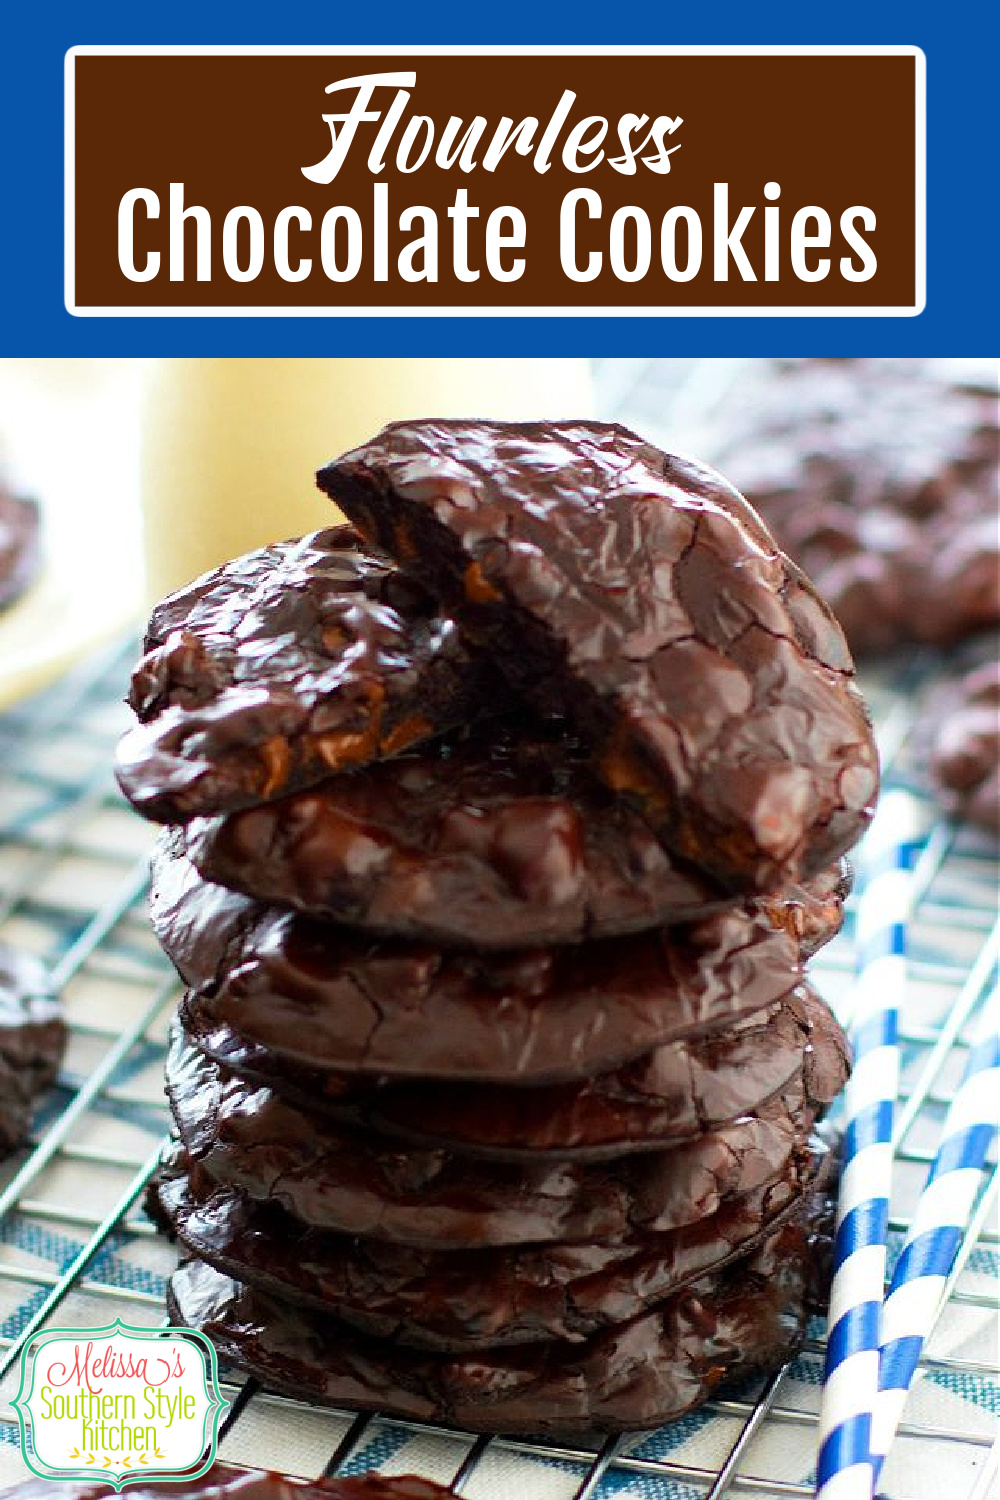 Rich and fudgy Flourless Chocolate Cookies #chocolatecookies #glutenfreecookies #chocolate #cookierecipes #holidaybaking #holidays #christmascookies #flourlesscookies #desserts #dessertfoodrecipes #southernfood #southernrecipes